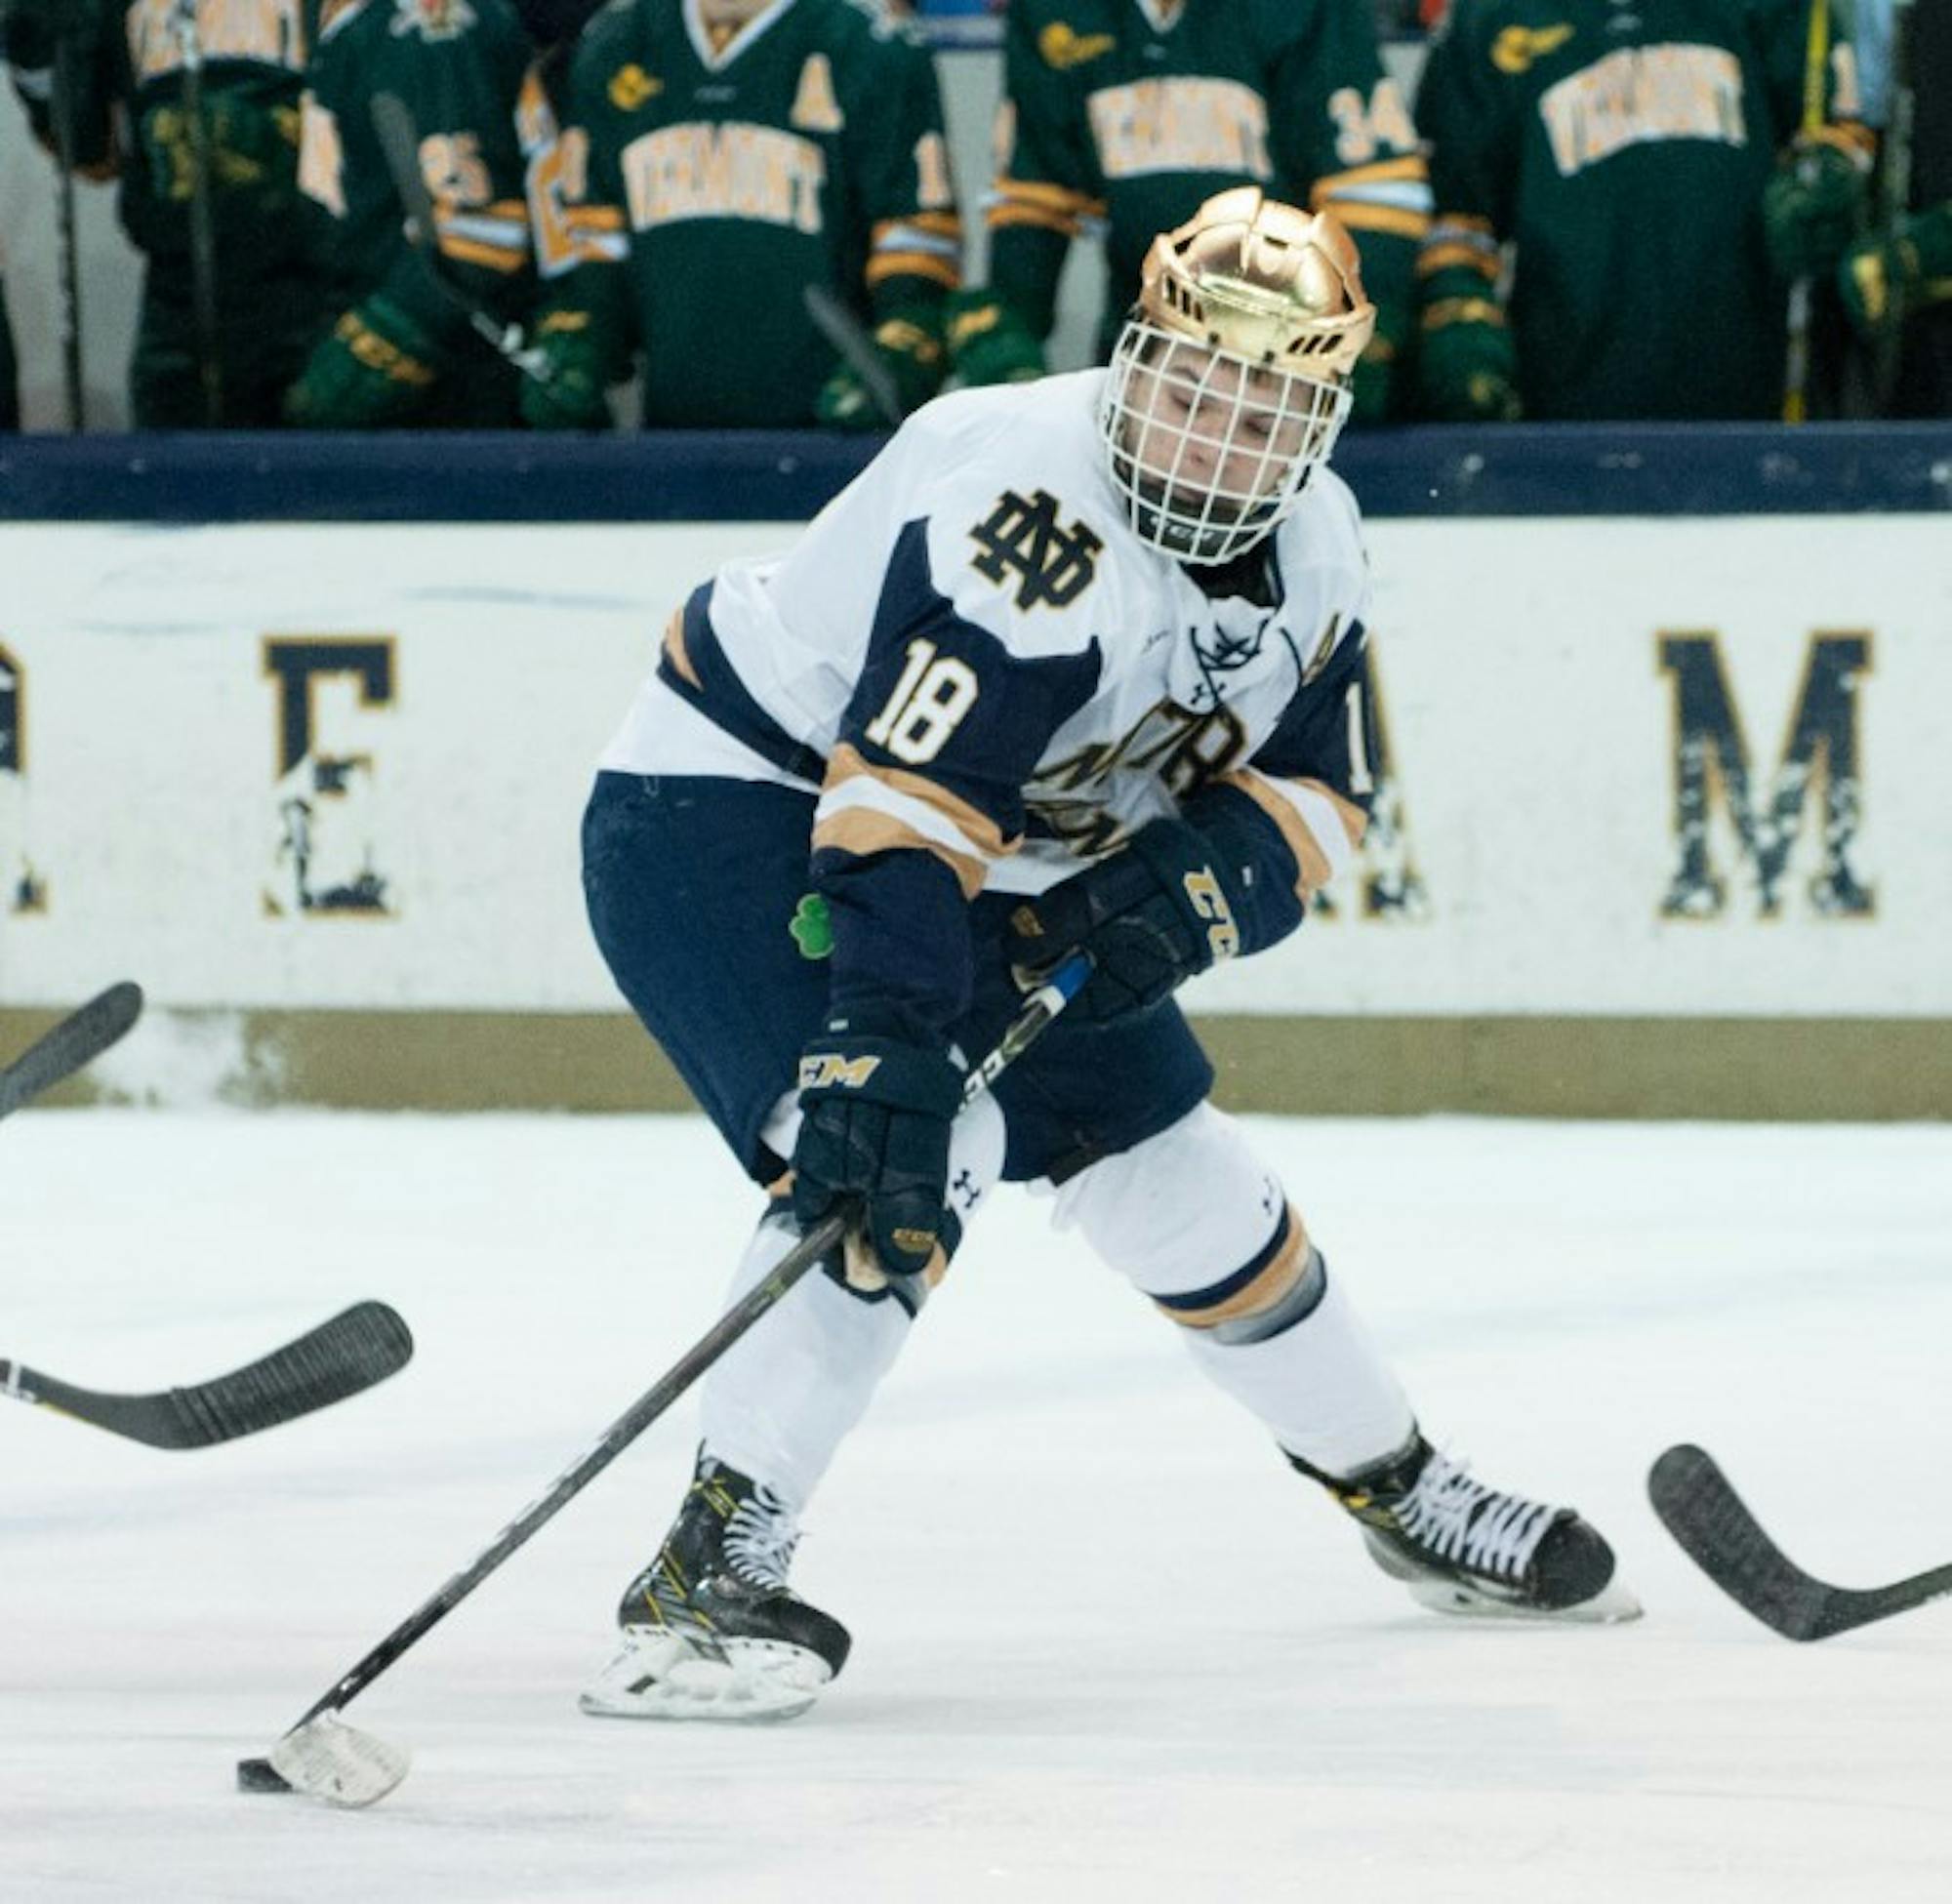 Irish junior forward Jake Evans maneuvers the puck in Notre Dame’s 4-4 tie with Vermont on Feb. 3 at Compton Family Ice Arena.